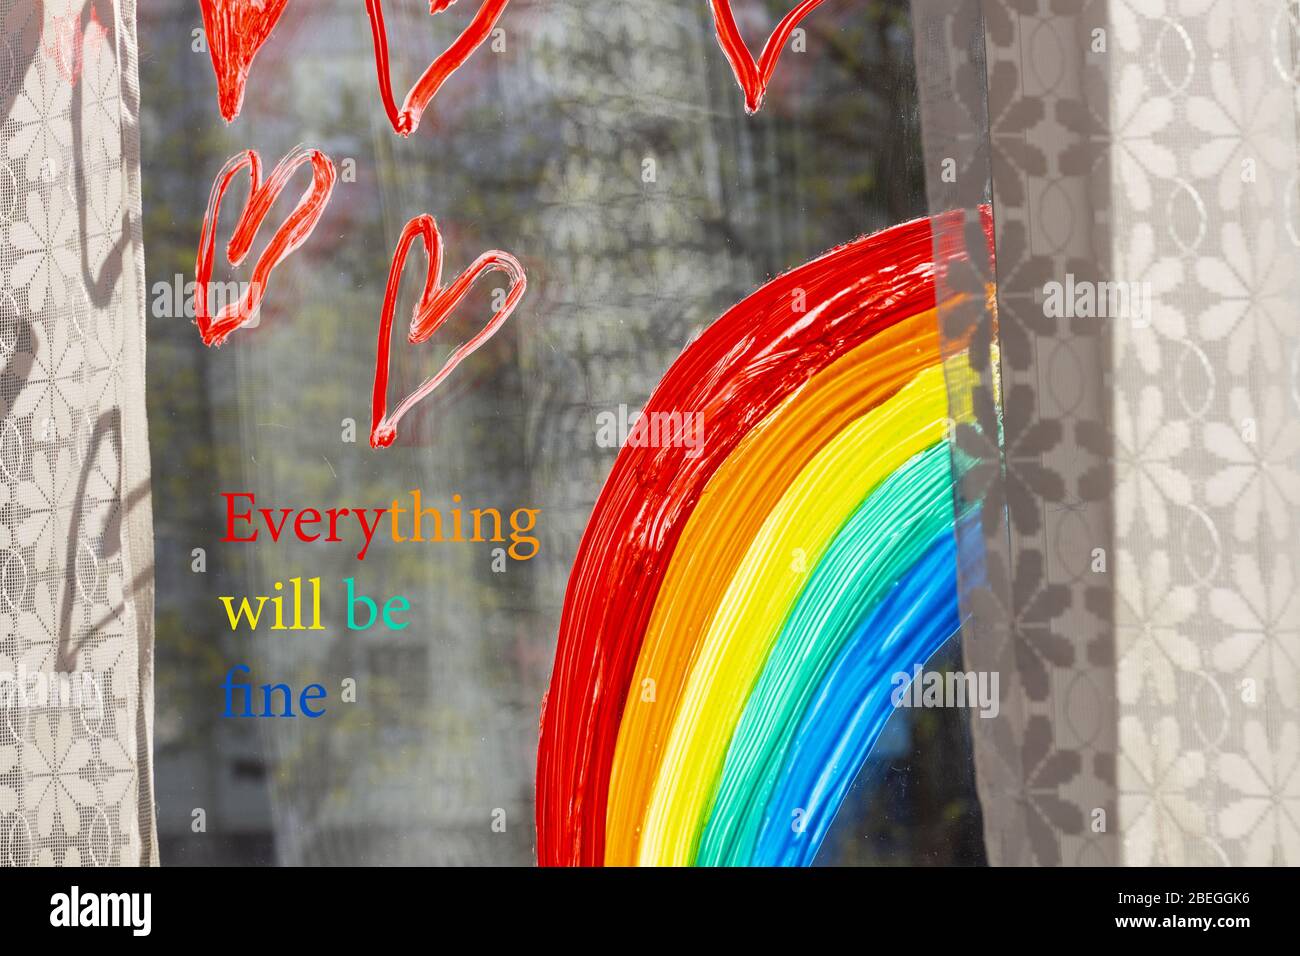 Coronavirus quarantined. To stay home. Everything will be fine. Rainbow and the inscription Stock Photo